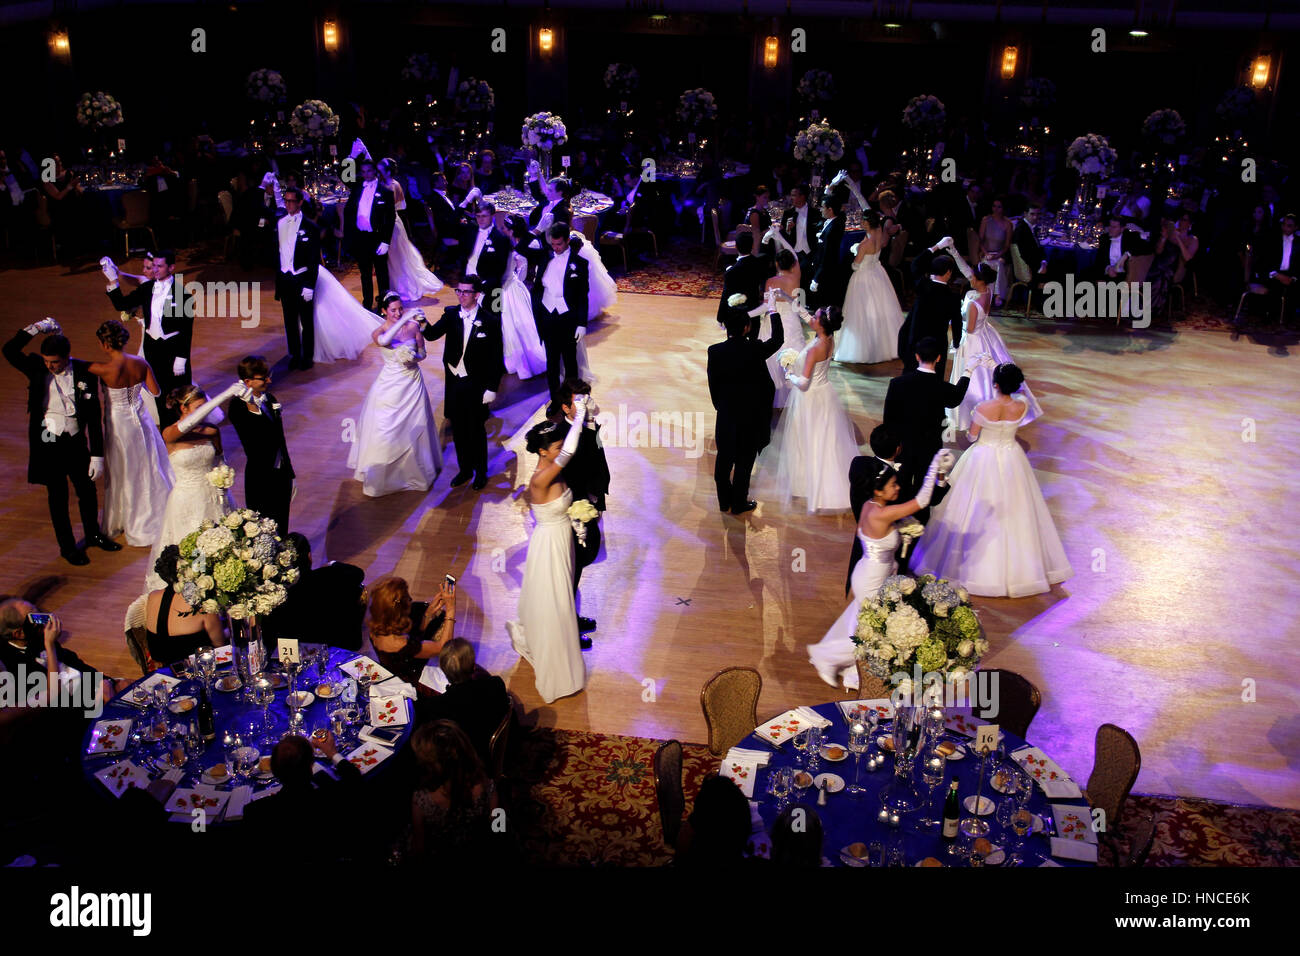 New York, United States. 10th Feb, 2017. Debutantes being escorted onto the dance floor during the 62nd Viennese Opera Ball at the Waldorf Astoria Hotel in New York City on February 10, 2017. The evening celebrated the 150th anniversary of Johann Strauss' Blue Danube Waltz and the gala event was to benefit the legacy of Leonard Bernstein, a project of the Jewish Museum in cooperation with the U.S. Friends of the Jewish Museum in Vienna. Credit: Adam Stoltman/Alamy Live News Stock Photo